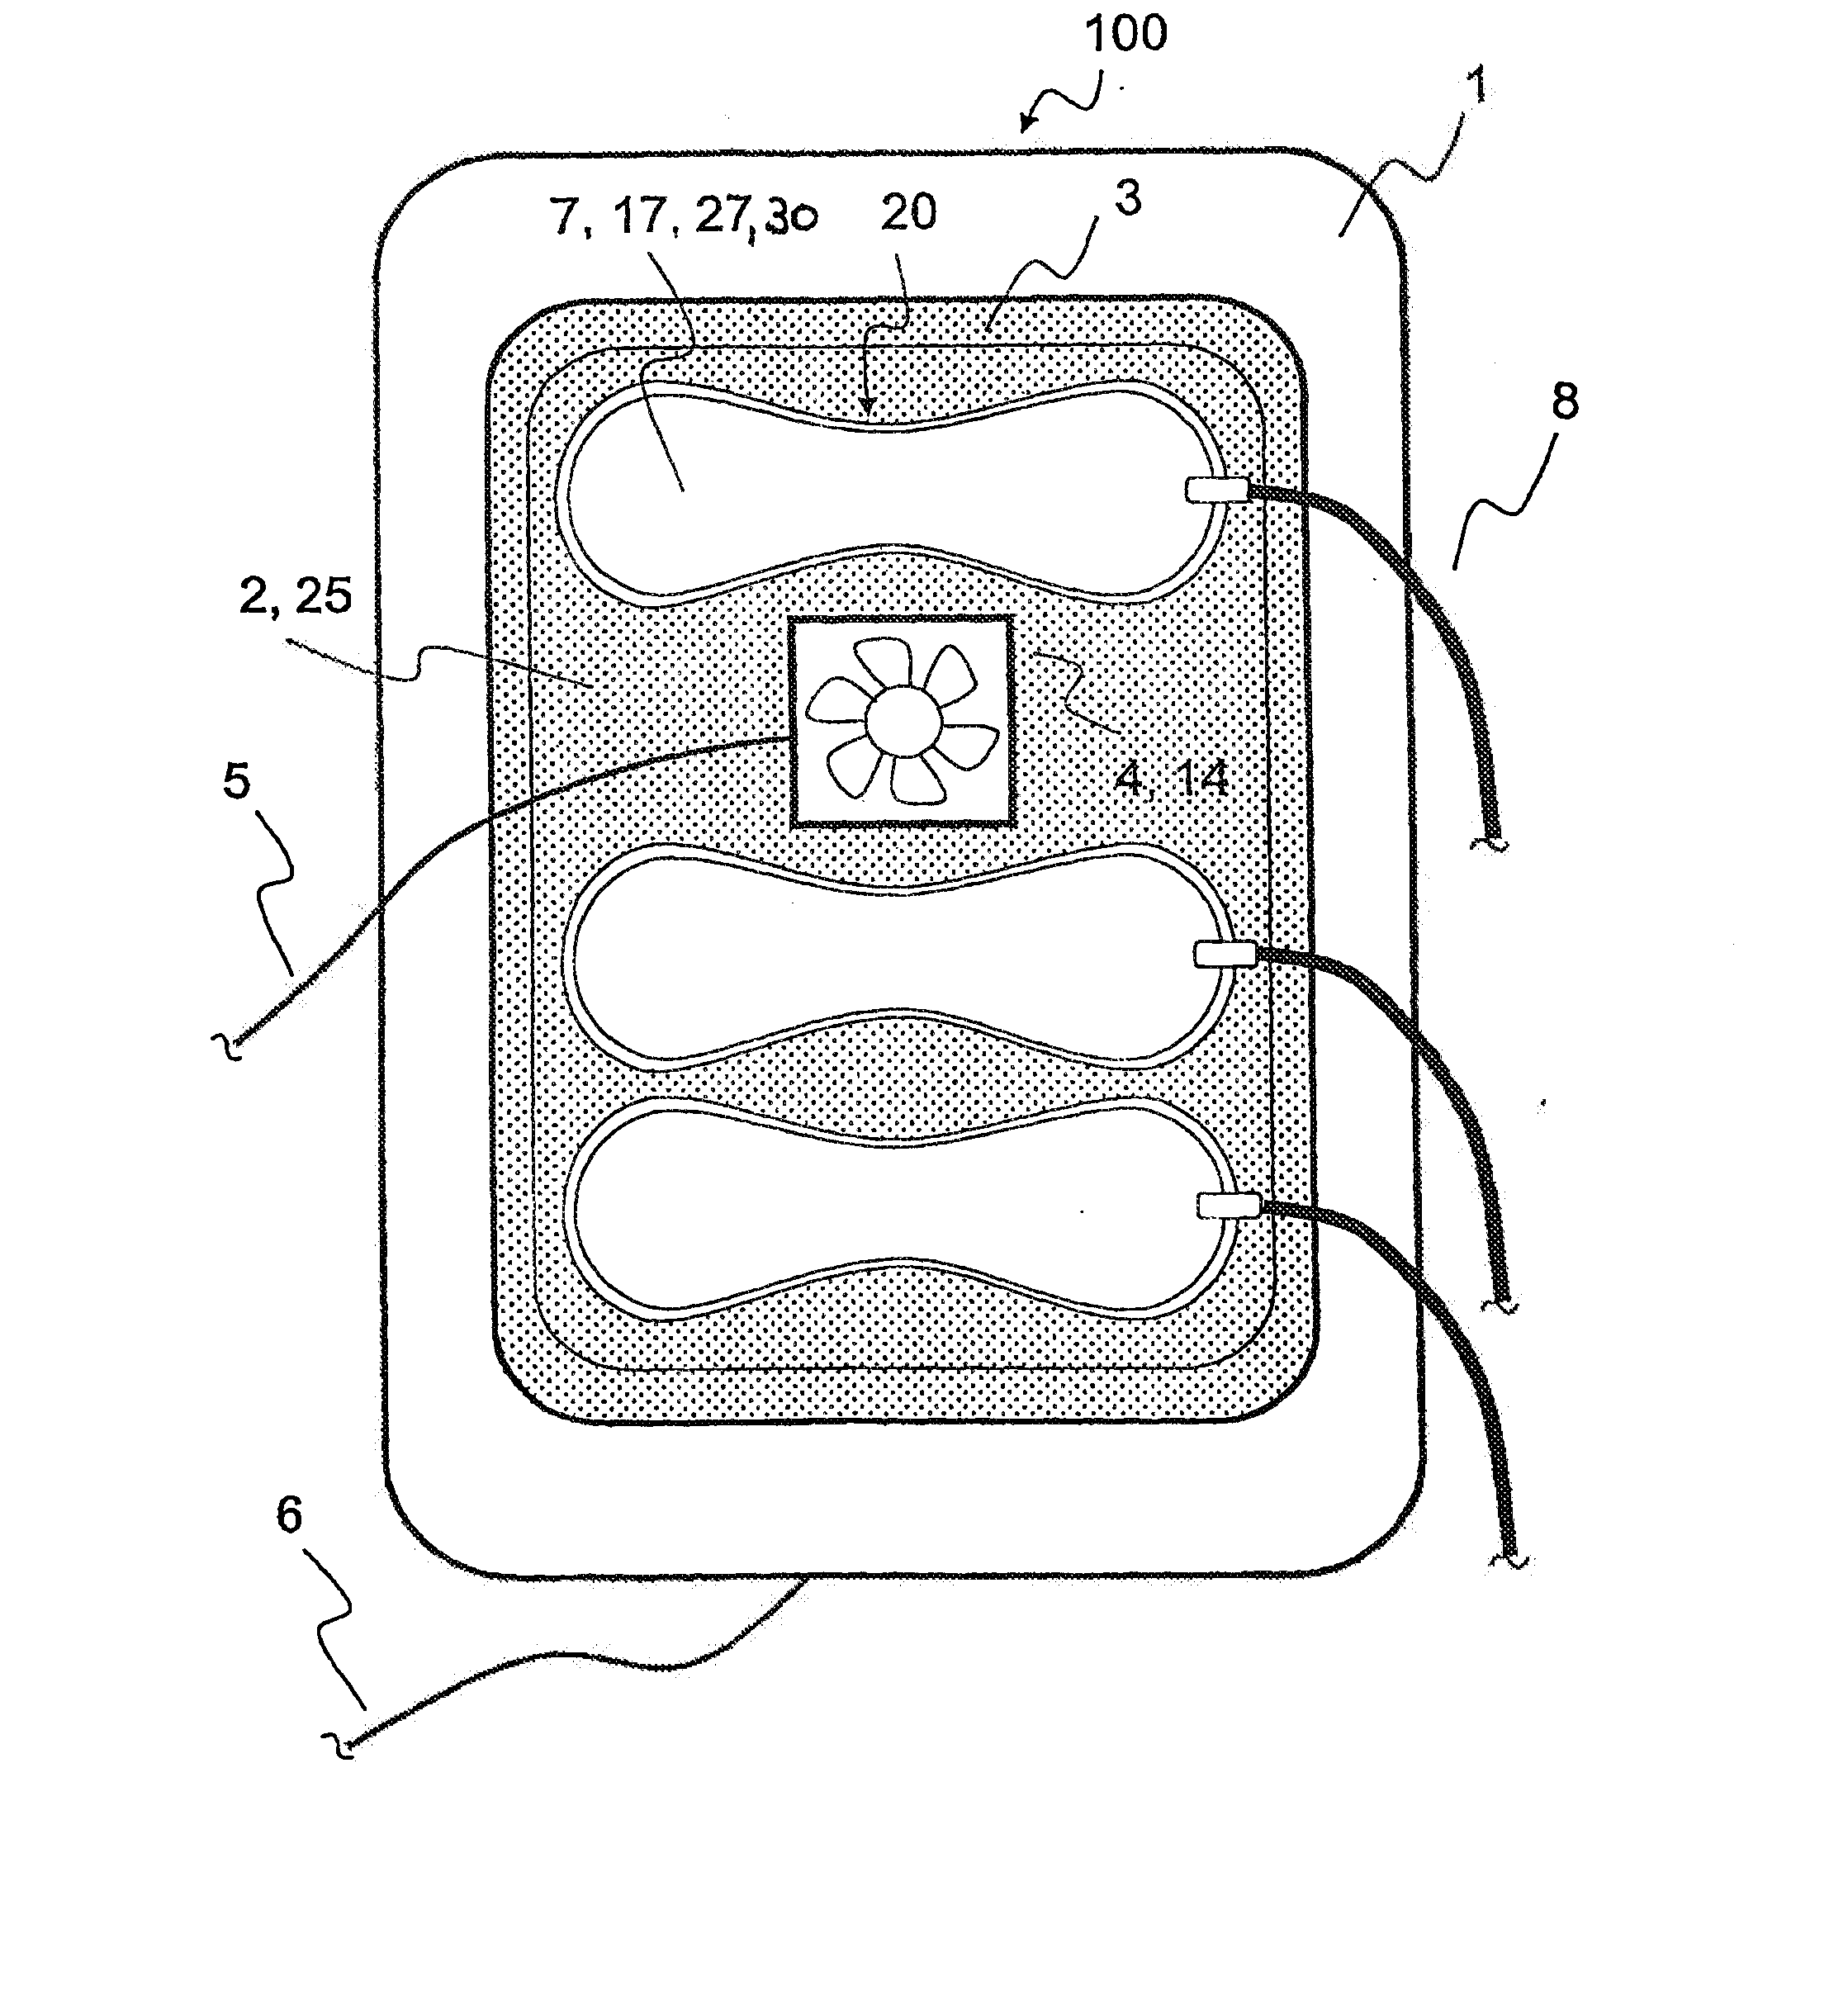 Device for conducting air in order to provide air conditioning for a body support device